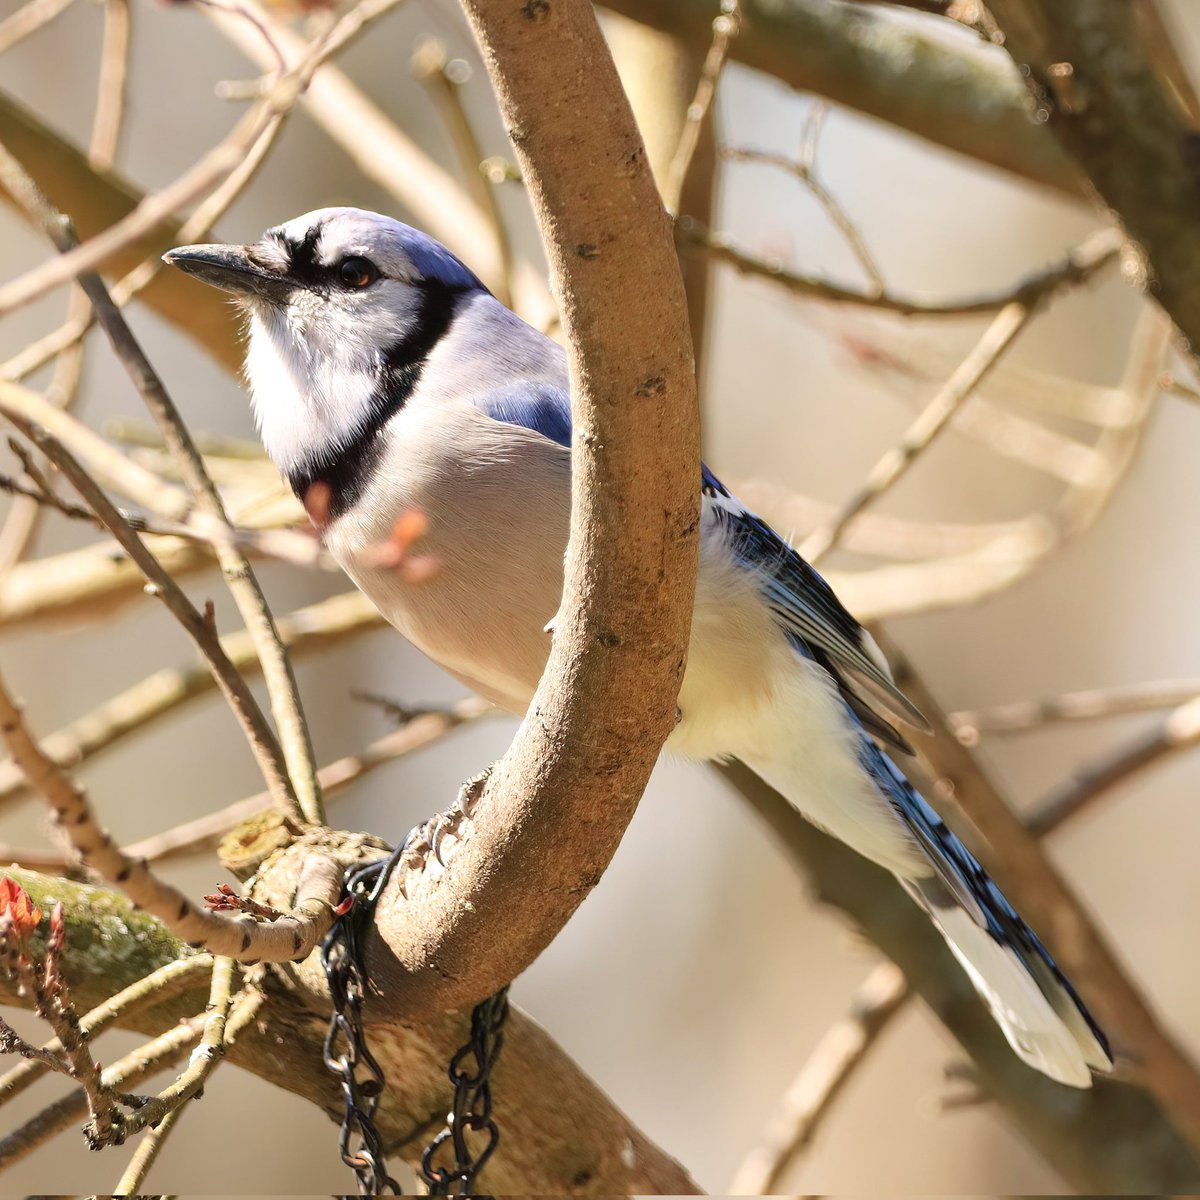 Our blue jays will always make an appearance when peanuts are on the menu! #bluejaybird #bluejays #bluejay #bluejayvisit #bluejayvisitor #bluejayvisitors #peanutlover #peanutlovers #peanuts #peanut #ohiobirdworld #ohiobirdlovers #birdlovers #birdwatching #birdwatchers #birdlife